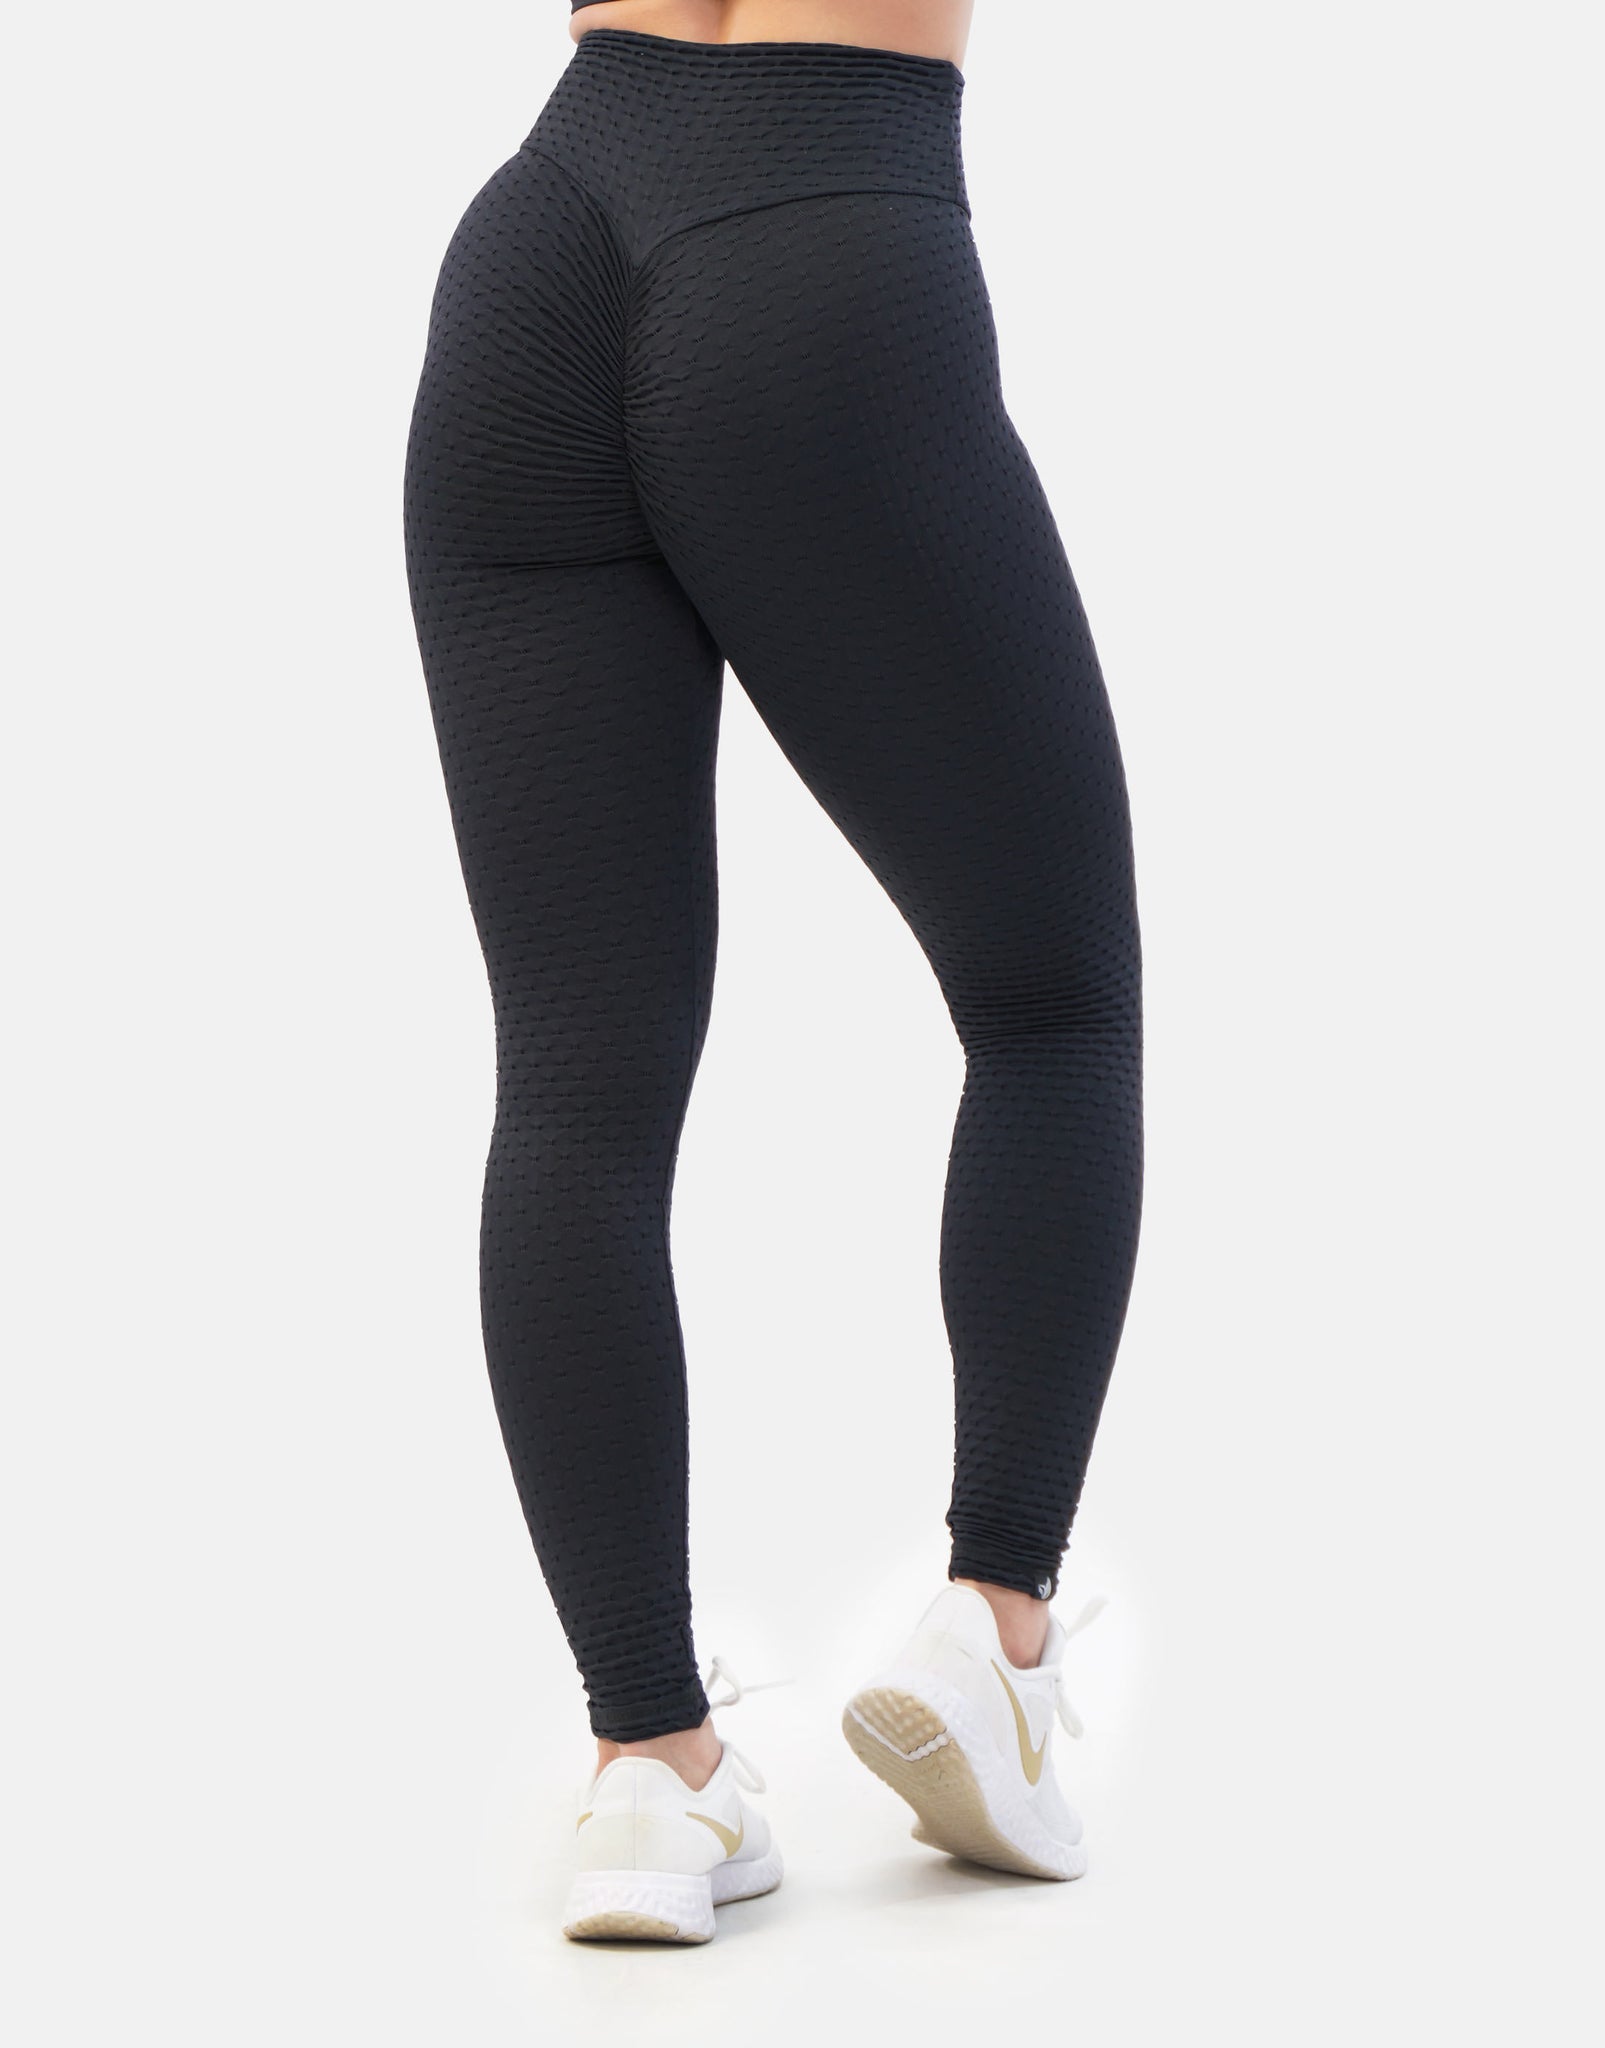 Moneyball Sportswear - Hottest leggings out - grab a pair today